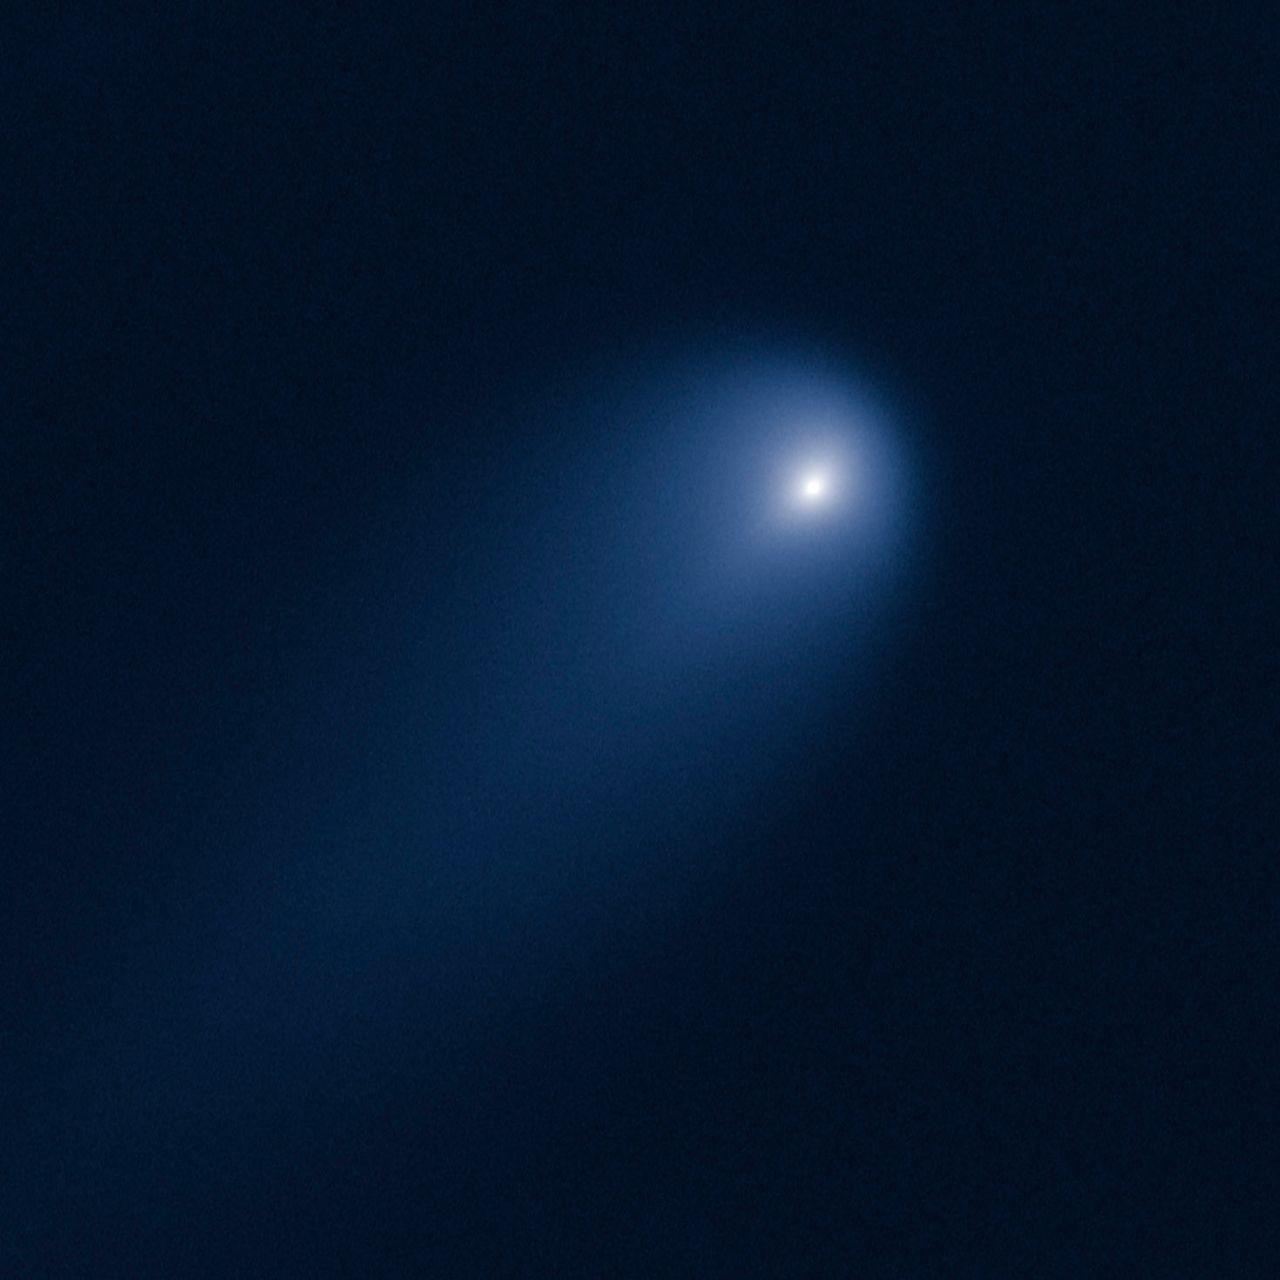 The Hubble Space Telescope took this picture of Comet ISON on April 10, 2013, when the comet was slightly closer than Jupiter's orbit, or about 386 million miles from our sun.